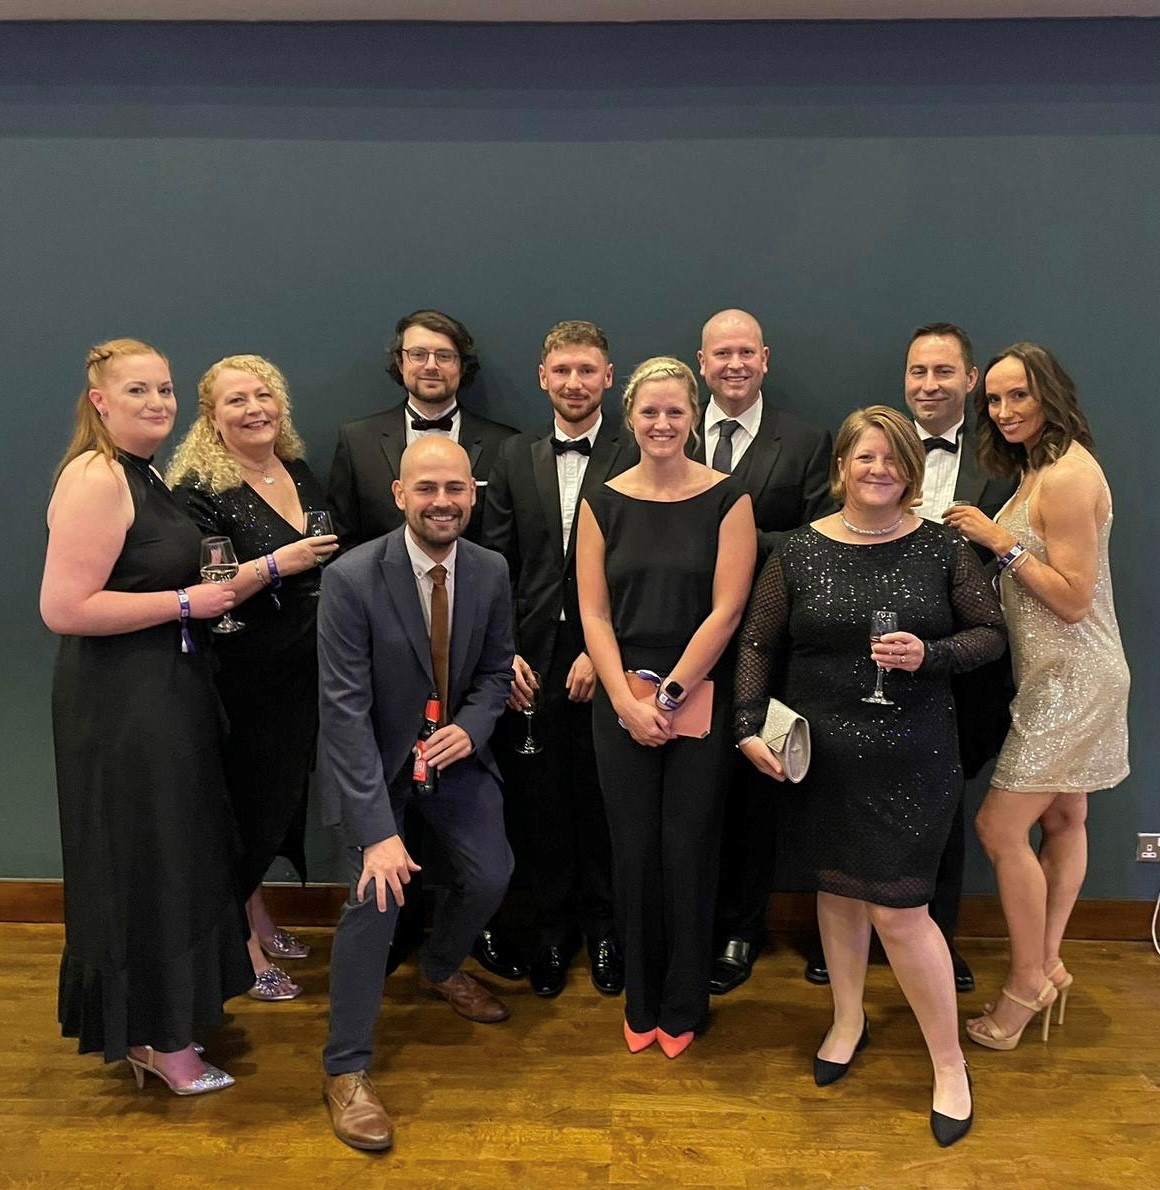 We are very proud to be working in partnership with @_ukactive this year as headline sponsors of the 2023 #ukactiveAwards … the team is suited & booted, and ready to start celebrating all the achievements of this year’s finalists and winners.

Good luck to everyone involved.